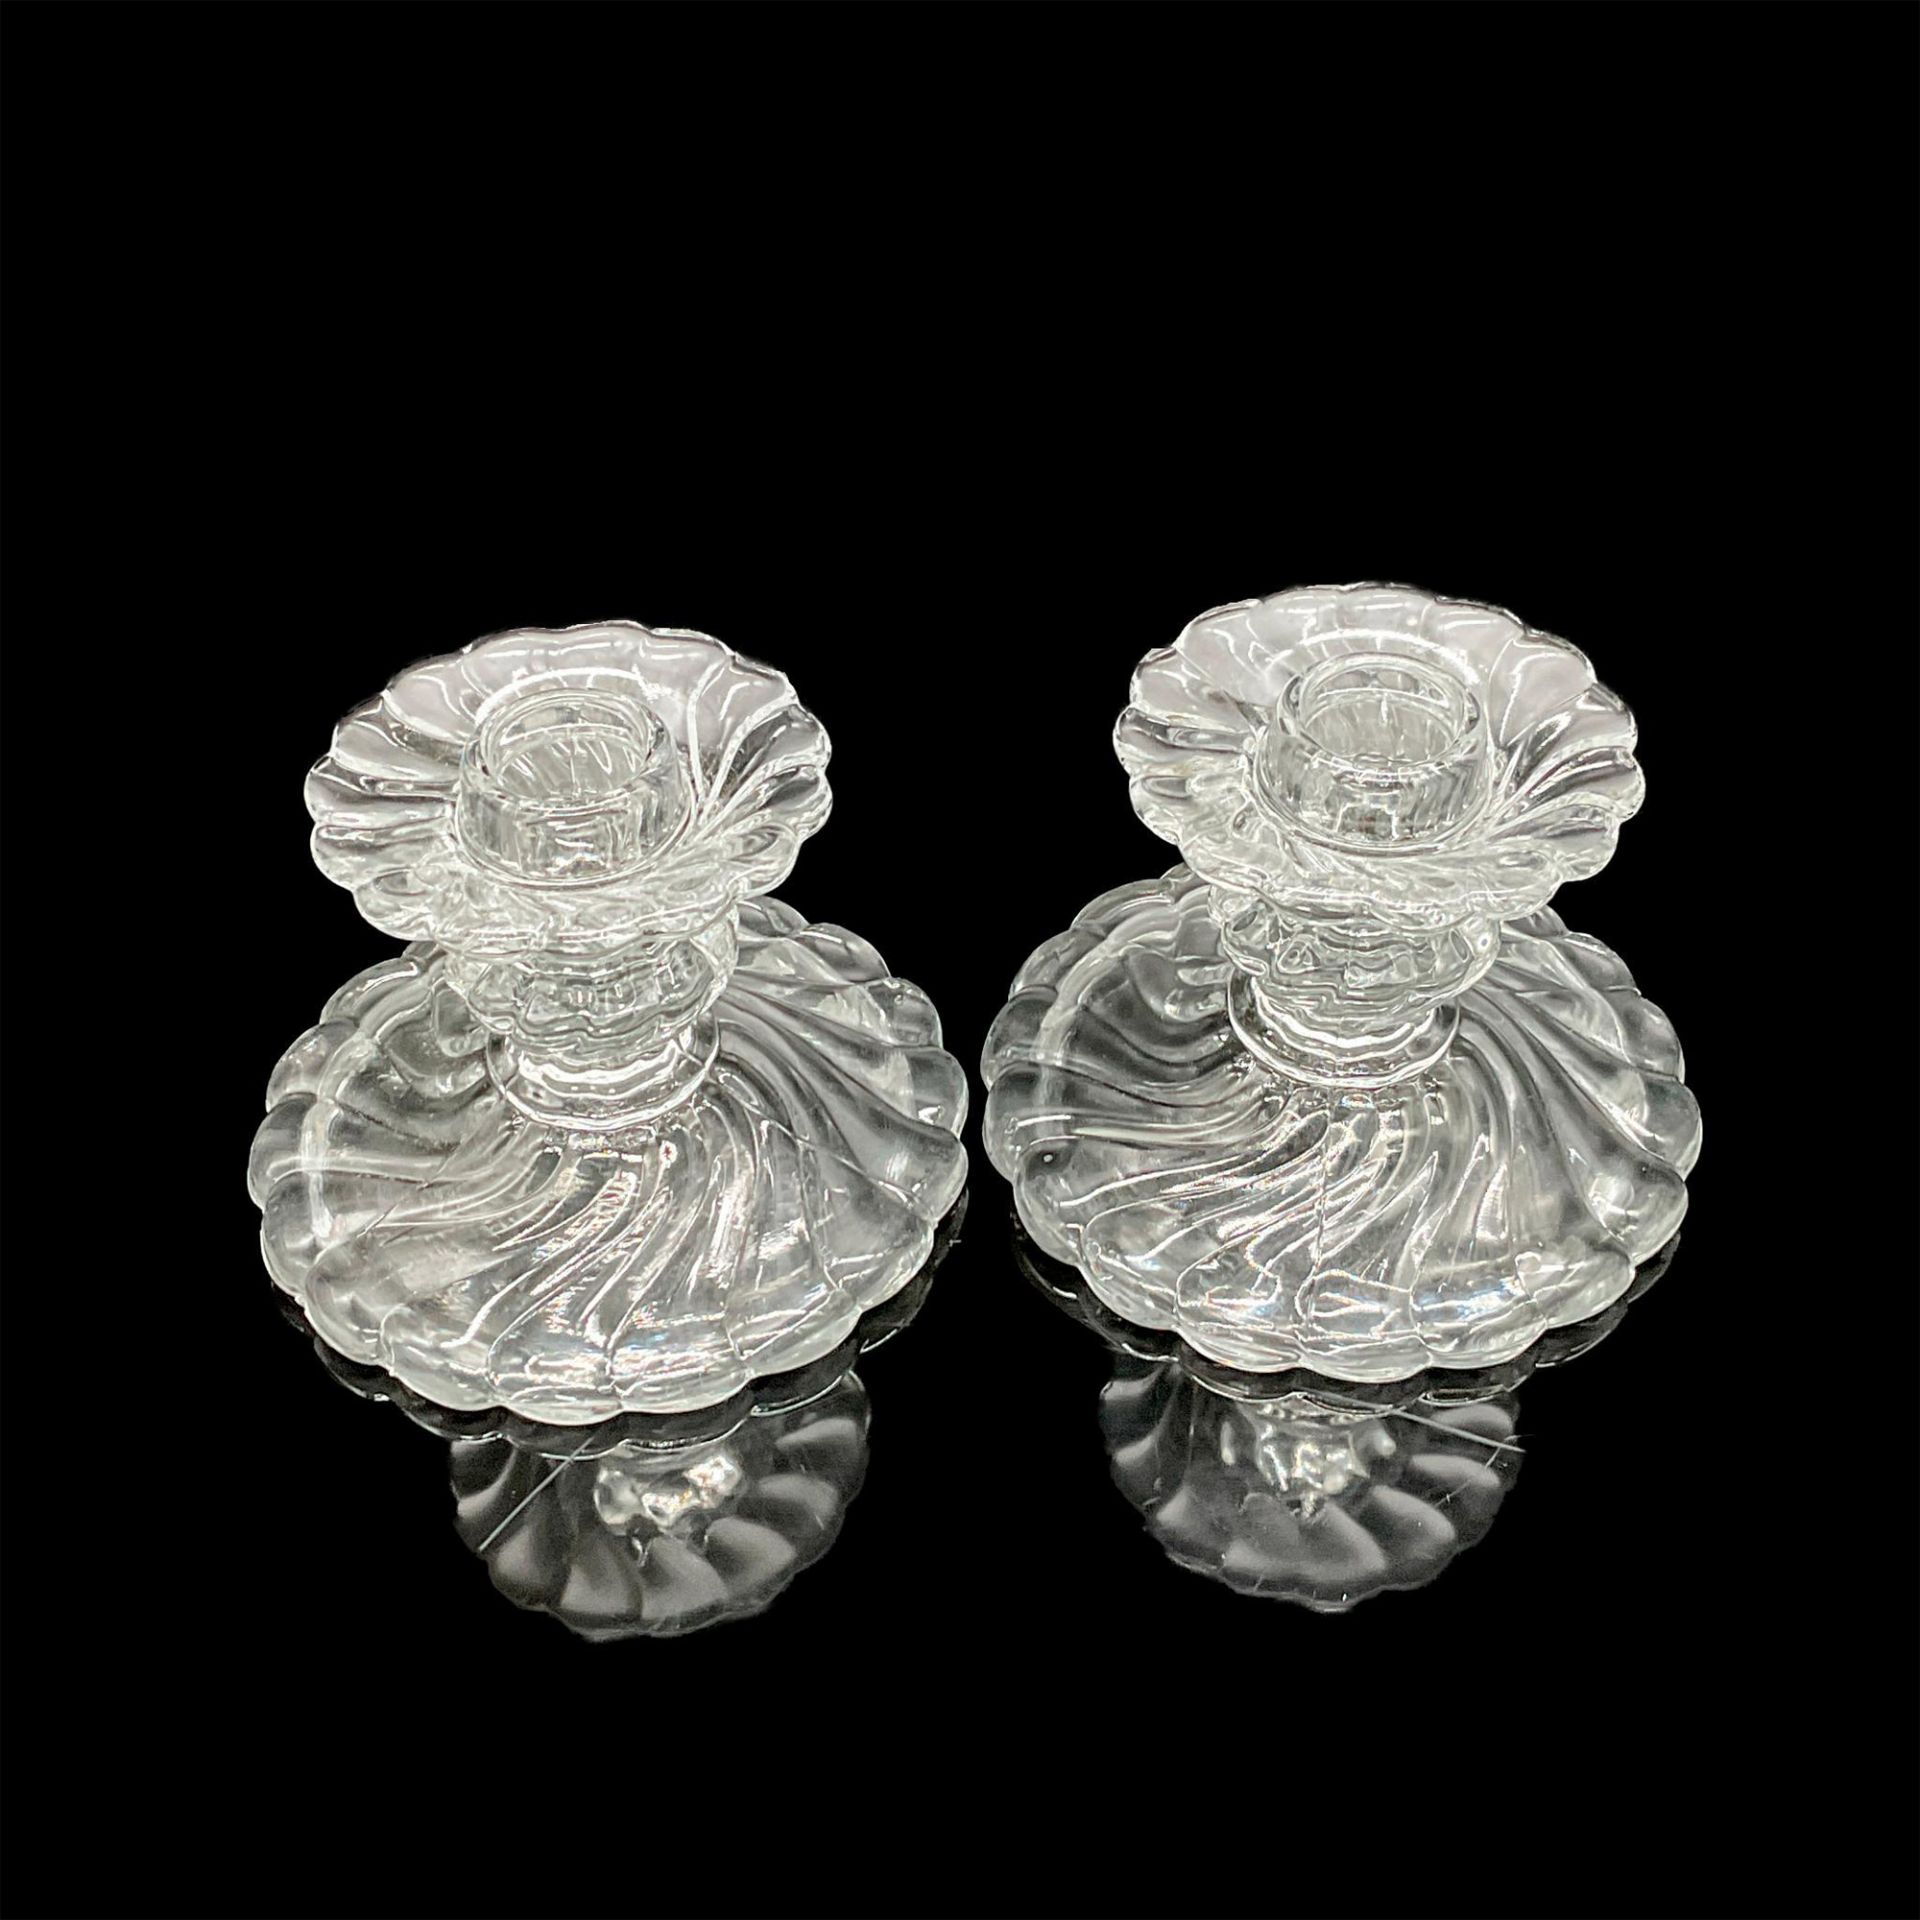 Pair of Fostoria Colony Glass Candle Holders - Image 2 of 3